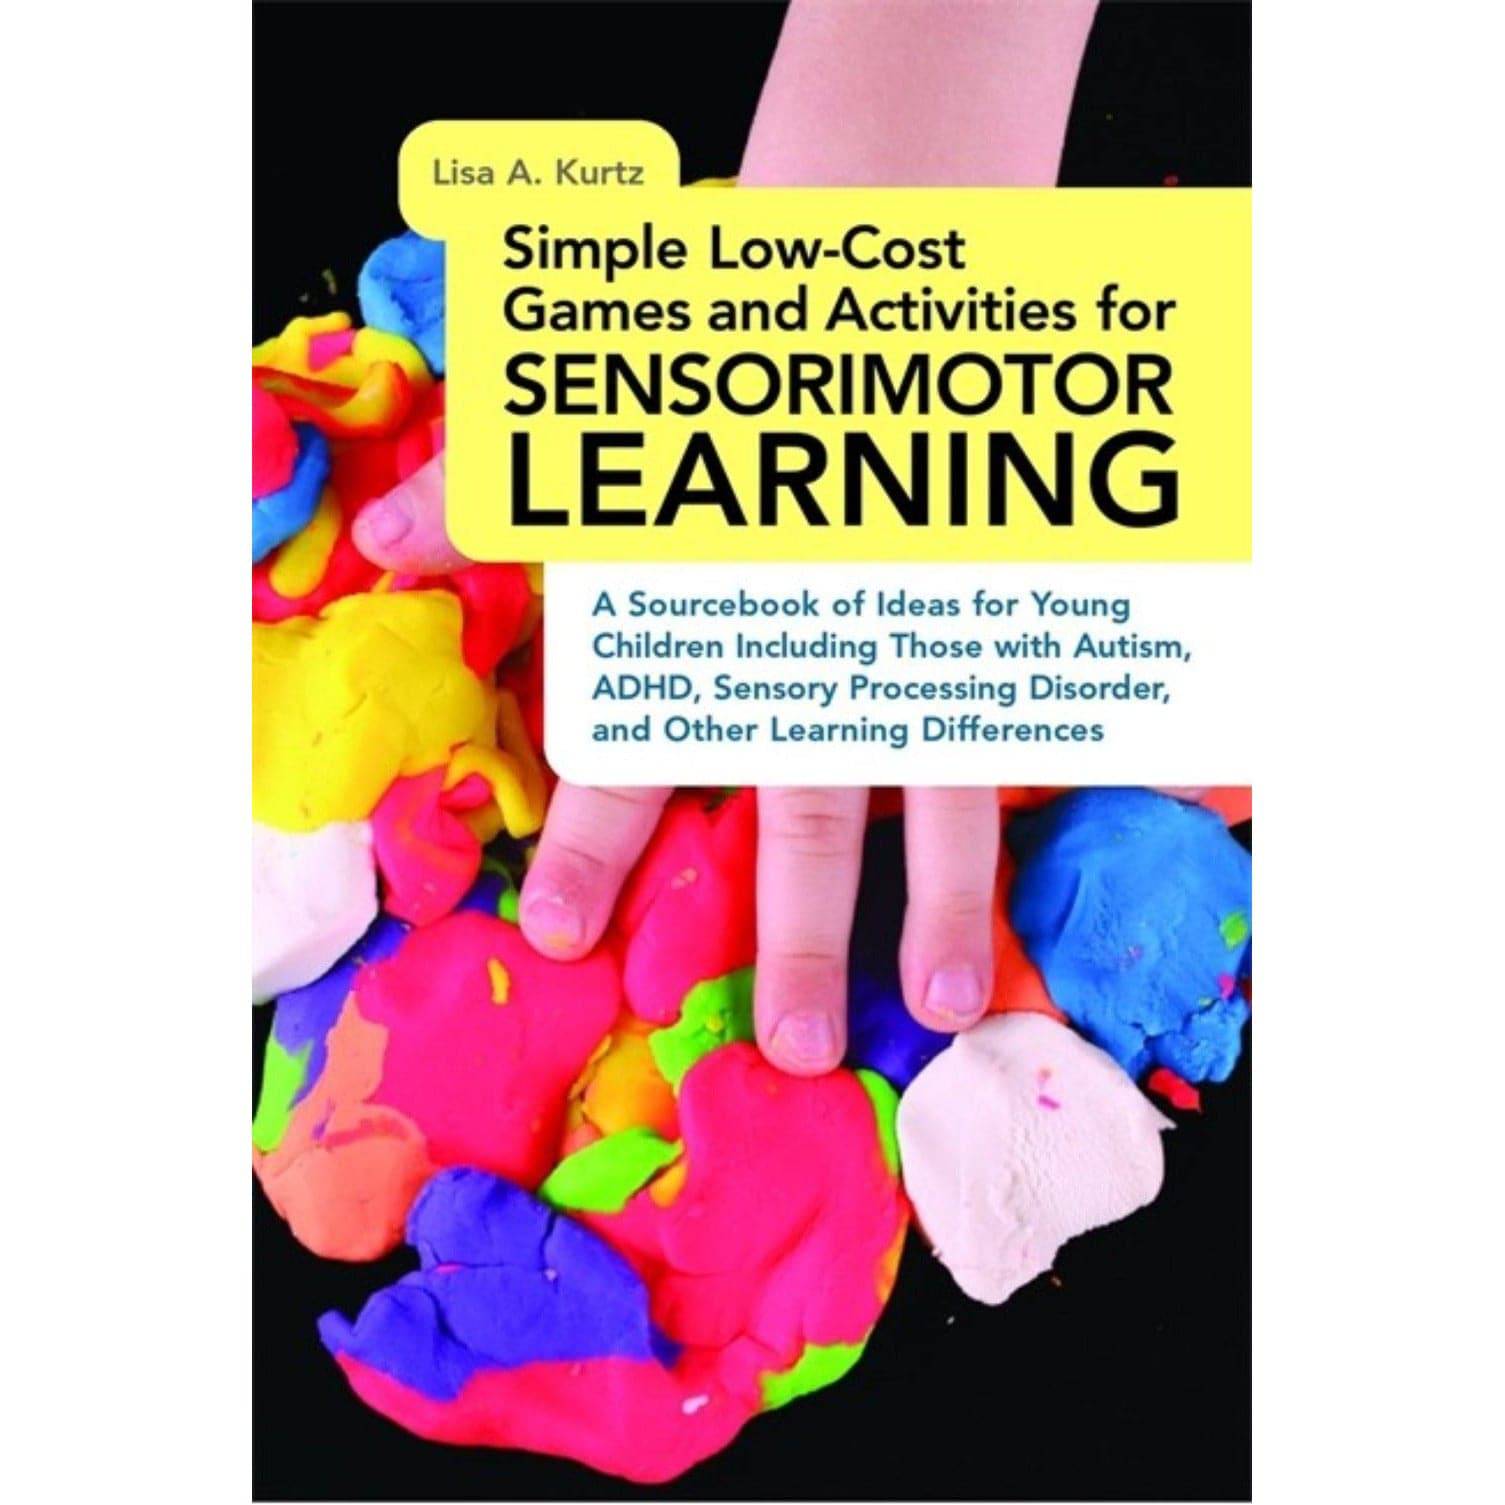 Simple Low-Cost Games and Activities for Sensorimotor Learning: A Source book of Ideas for Young Children Including Those with Autism, ADHD, Sensory Processing Disorder, and Other Learning Differences - Sensory Circle